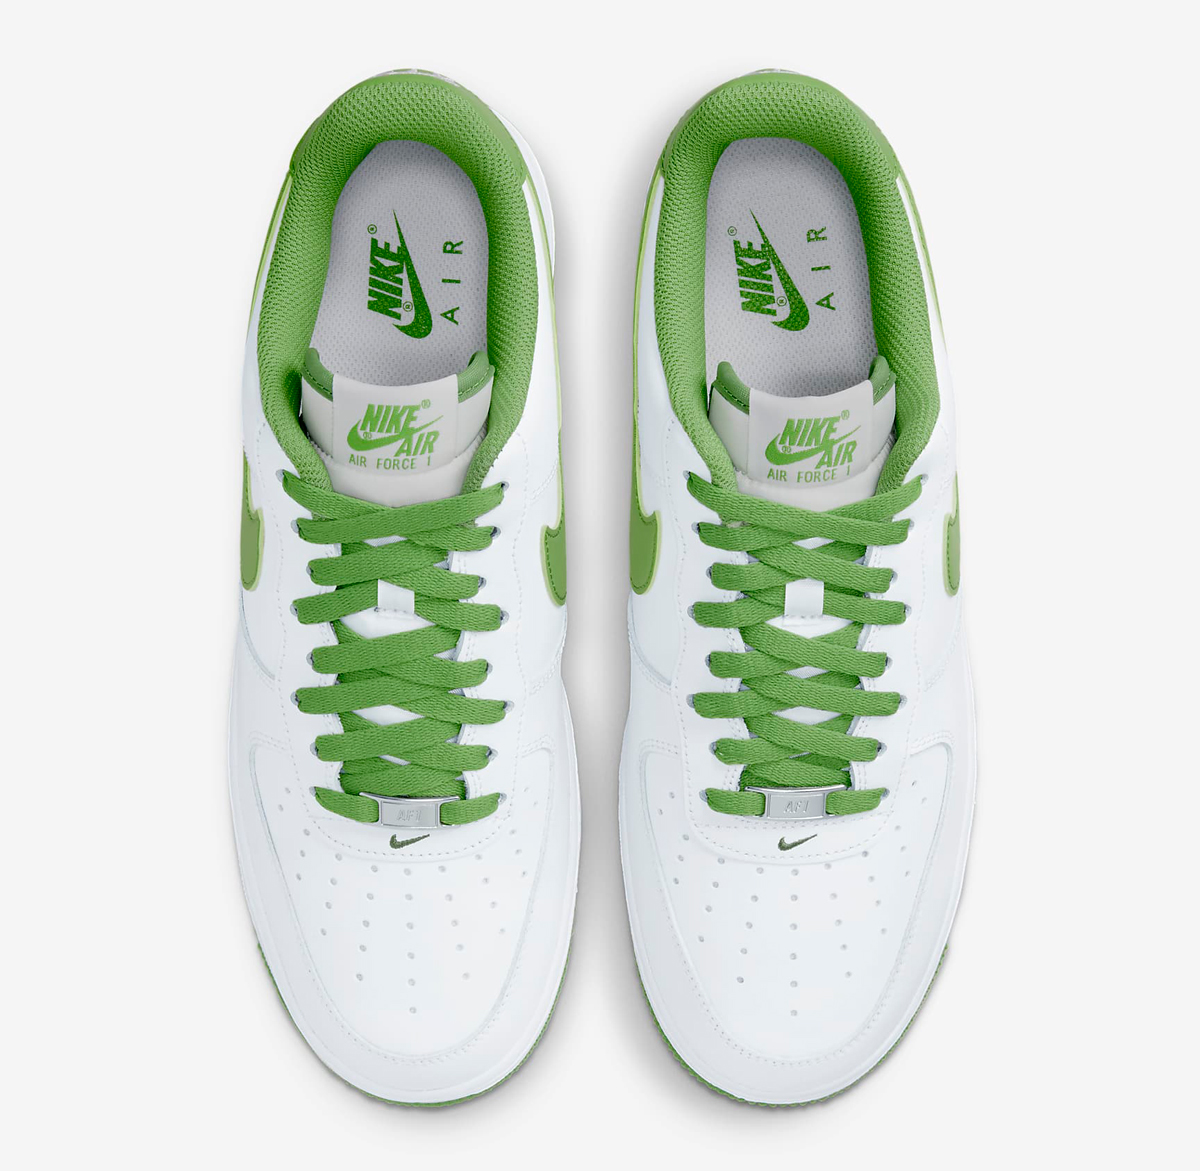 Nike Air Force 1 Low Chlorophyll Shirts Clothing Outfits